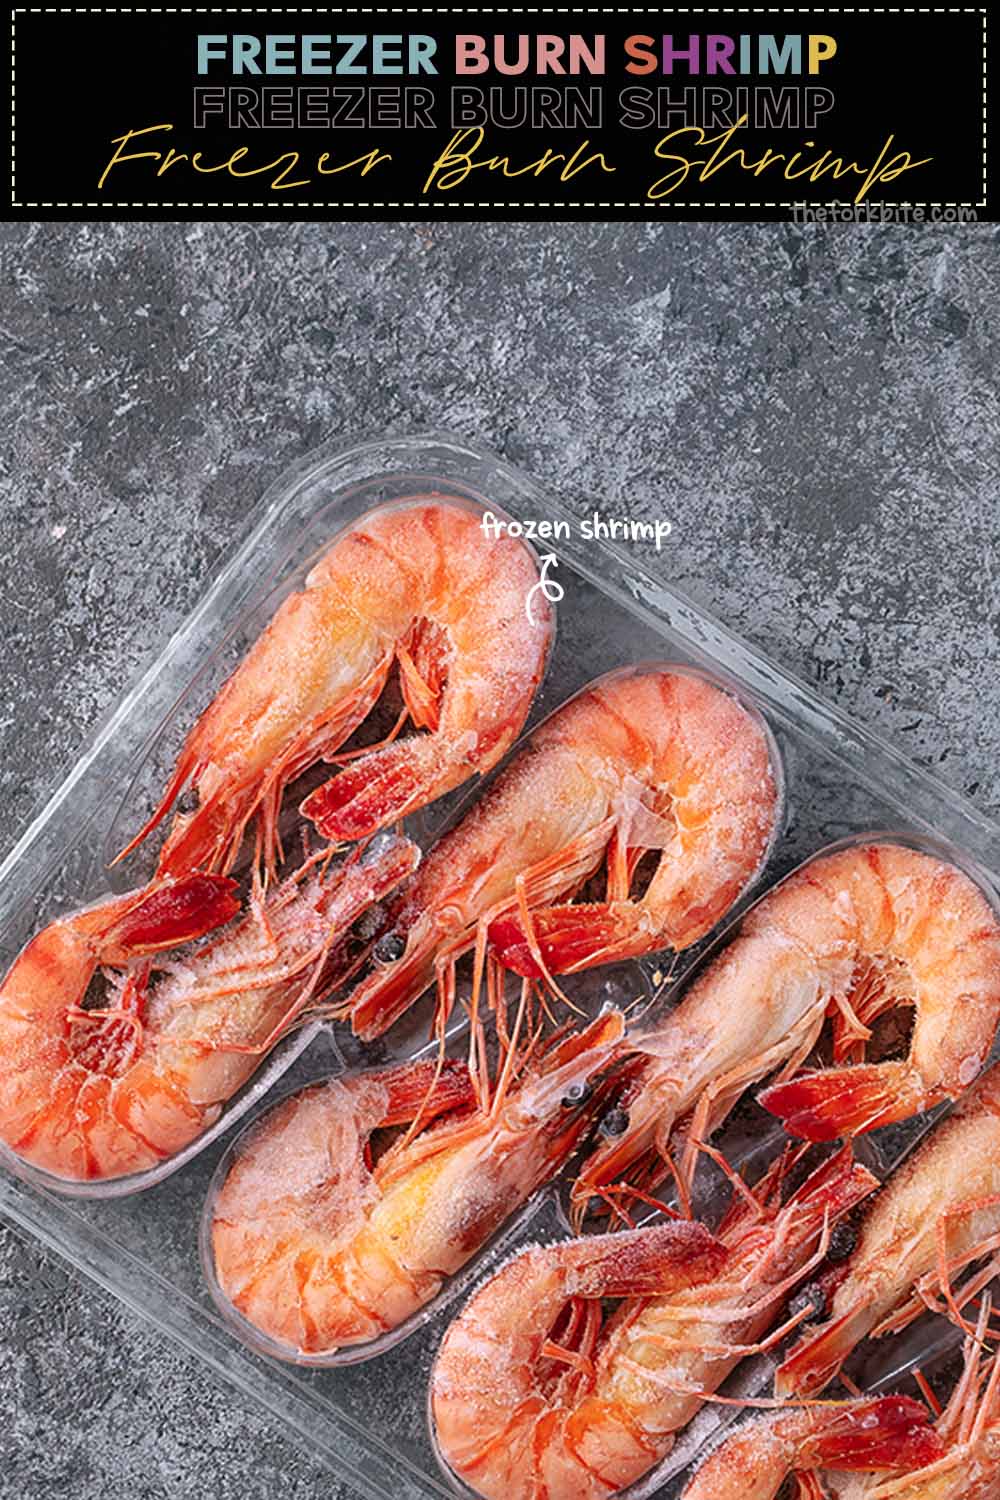 Freezer burn shrimp is a pain. If you don't know how best to go about preventing it, it will play havoc with your frozen food